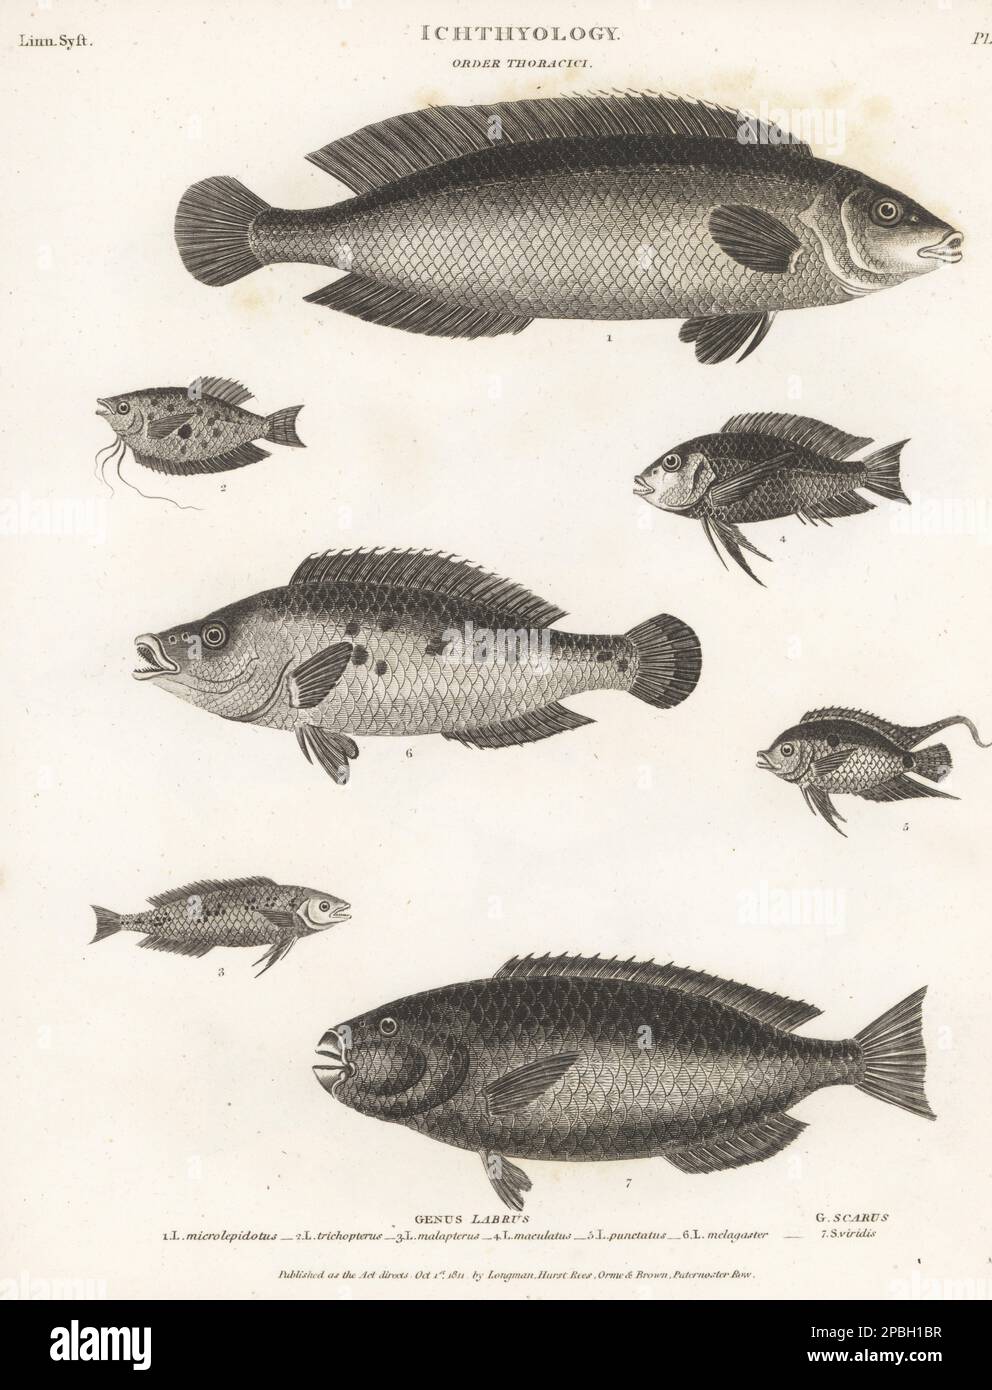 Cuckoo wrasse, Labrus mixtus 1, three-spot gourami, Trichopodus trichopterus 2,  black-eye thicklip wrasse, Hemigymnus melapterus 3, ballan wrasse, Labrus bergylta 4, Guyana leaffish, Polycentrus schomburgkii 5, Nile tilapia, Oreochromis niloticus 6, and parrotfish, Chlorurus japanensis 7. Copperplate engraving by Thomas Milton from Abraham Rees' Cyclopedia or Universal Dictionary of Arts, Sciences and Literature, Longman, Hurst, Rees, Orme and Brown, Paternoster Row, London, October 1, 1811. Stock Photo